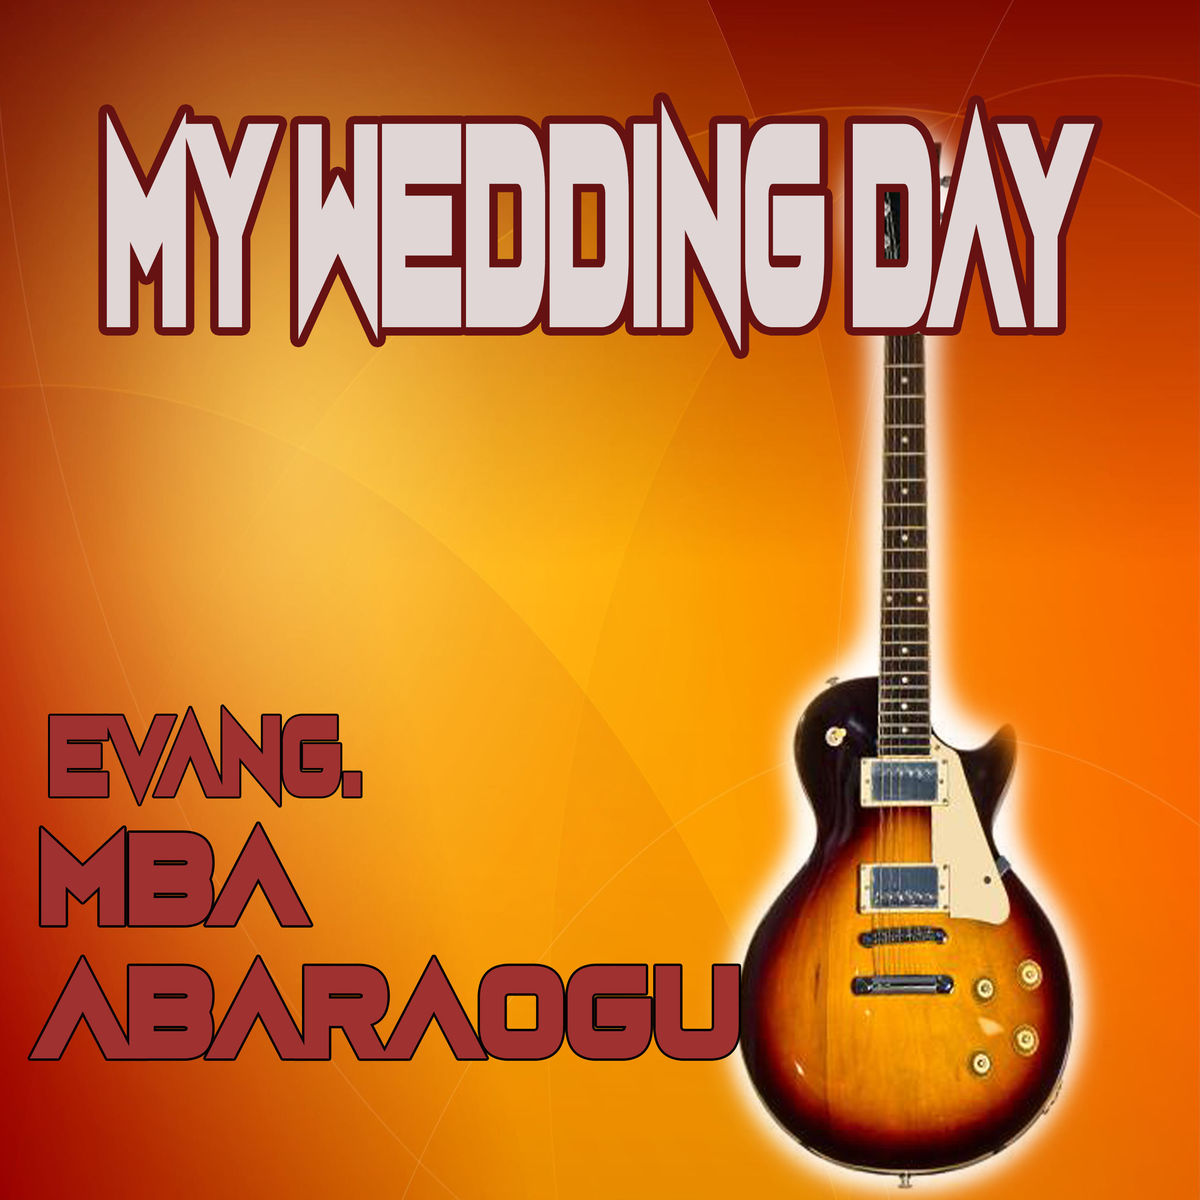 Evang. Mba Abaraogu – You The One